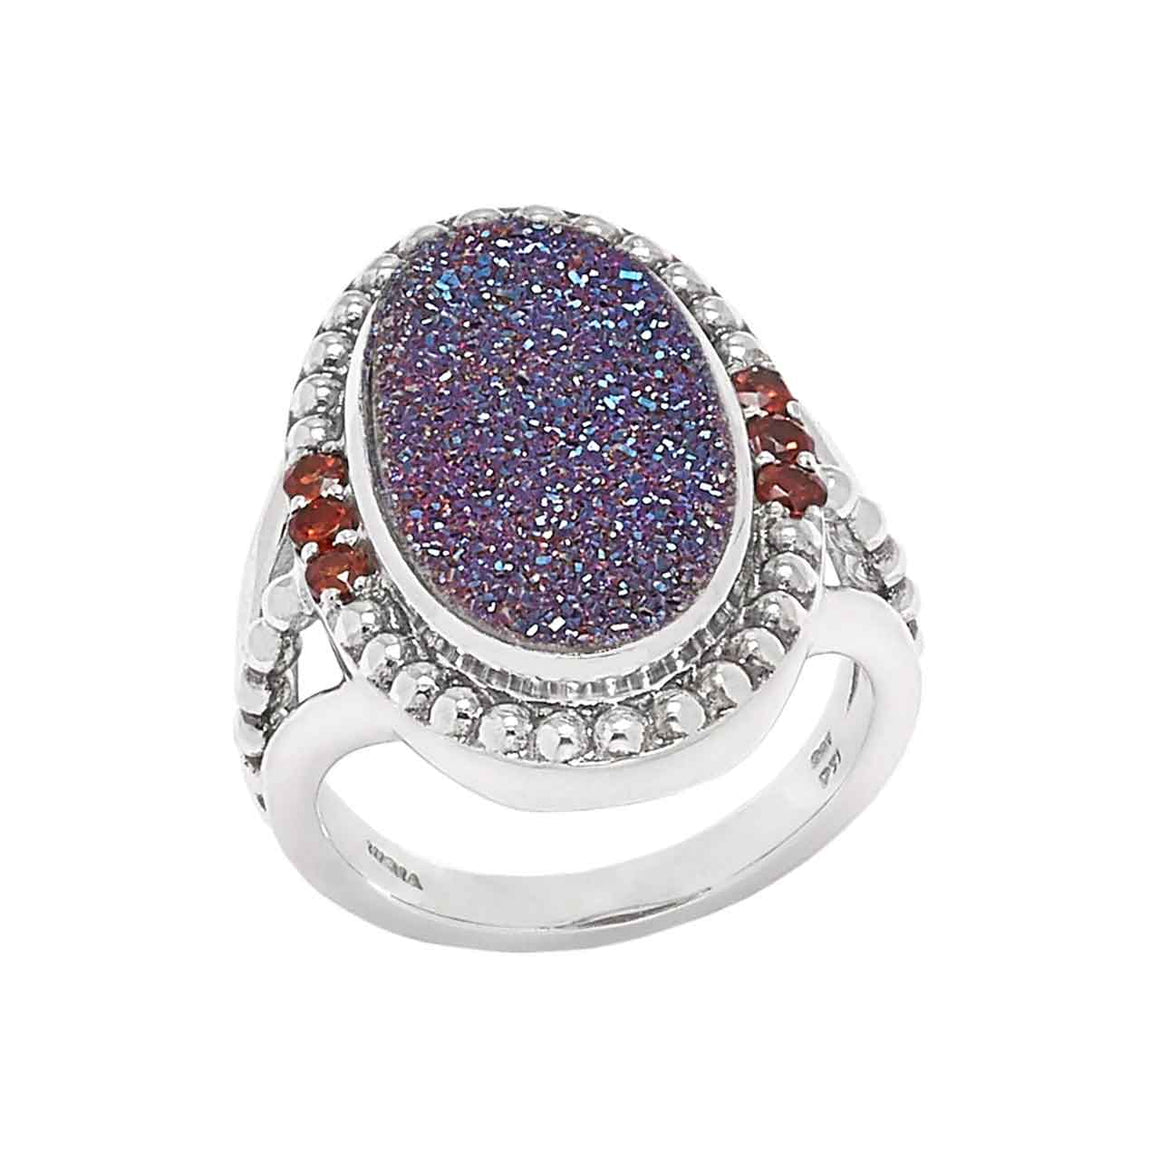 Red Drusy and Garnet 7 Stone Ring